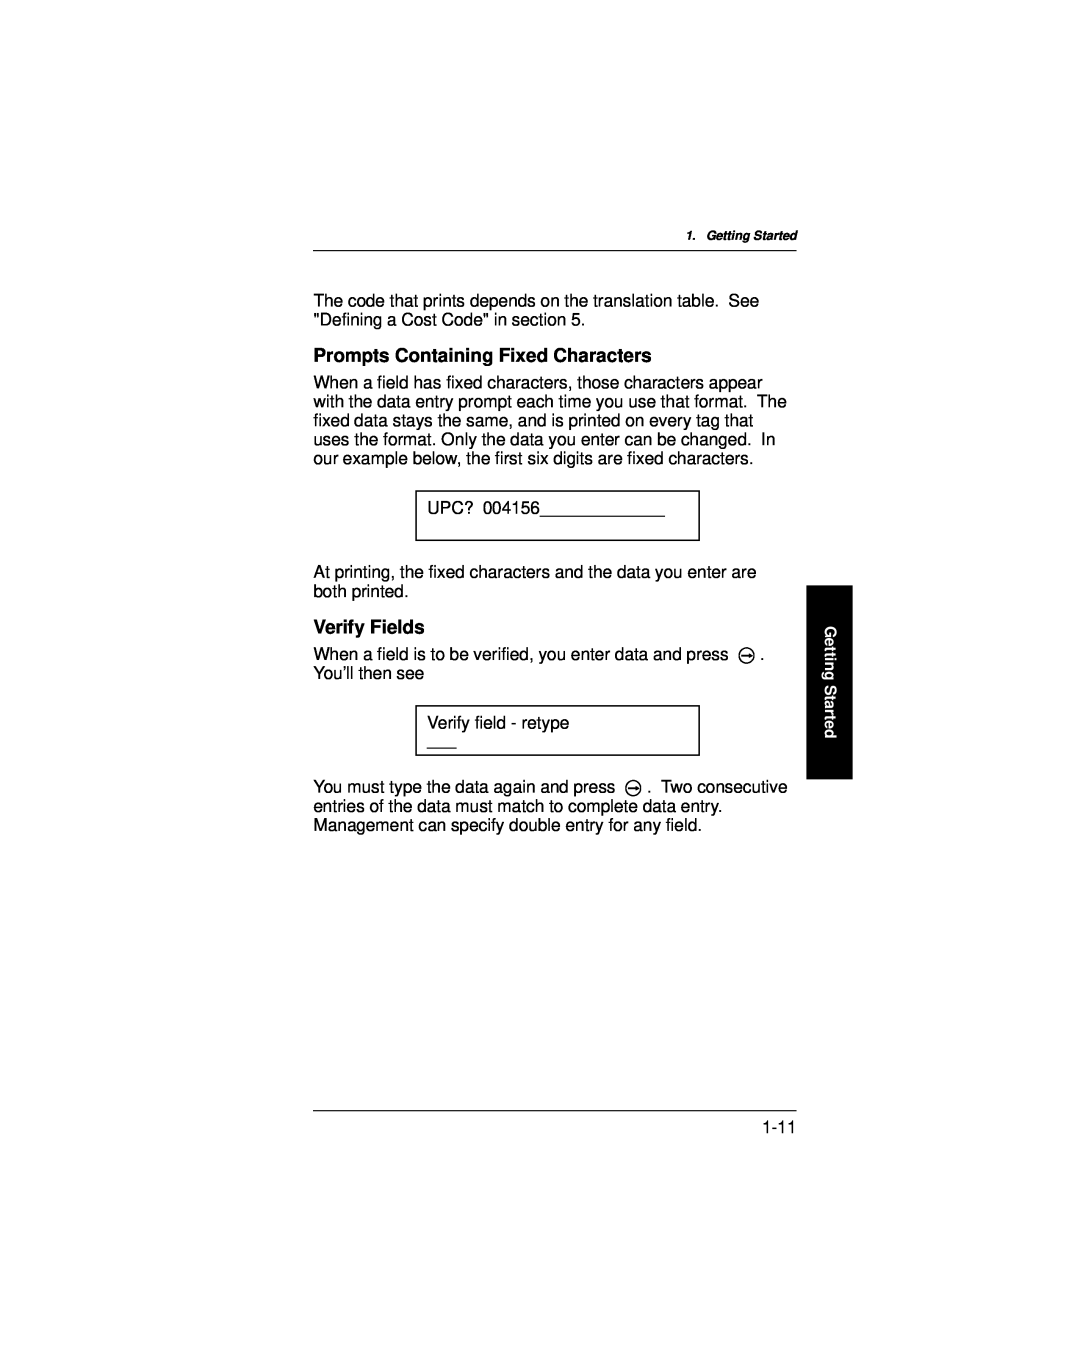 Paxar 9400 manual Prompts Containing Fixed Characters, Verify Fields 